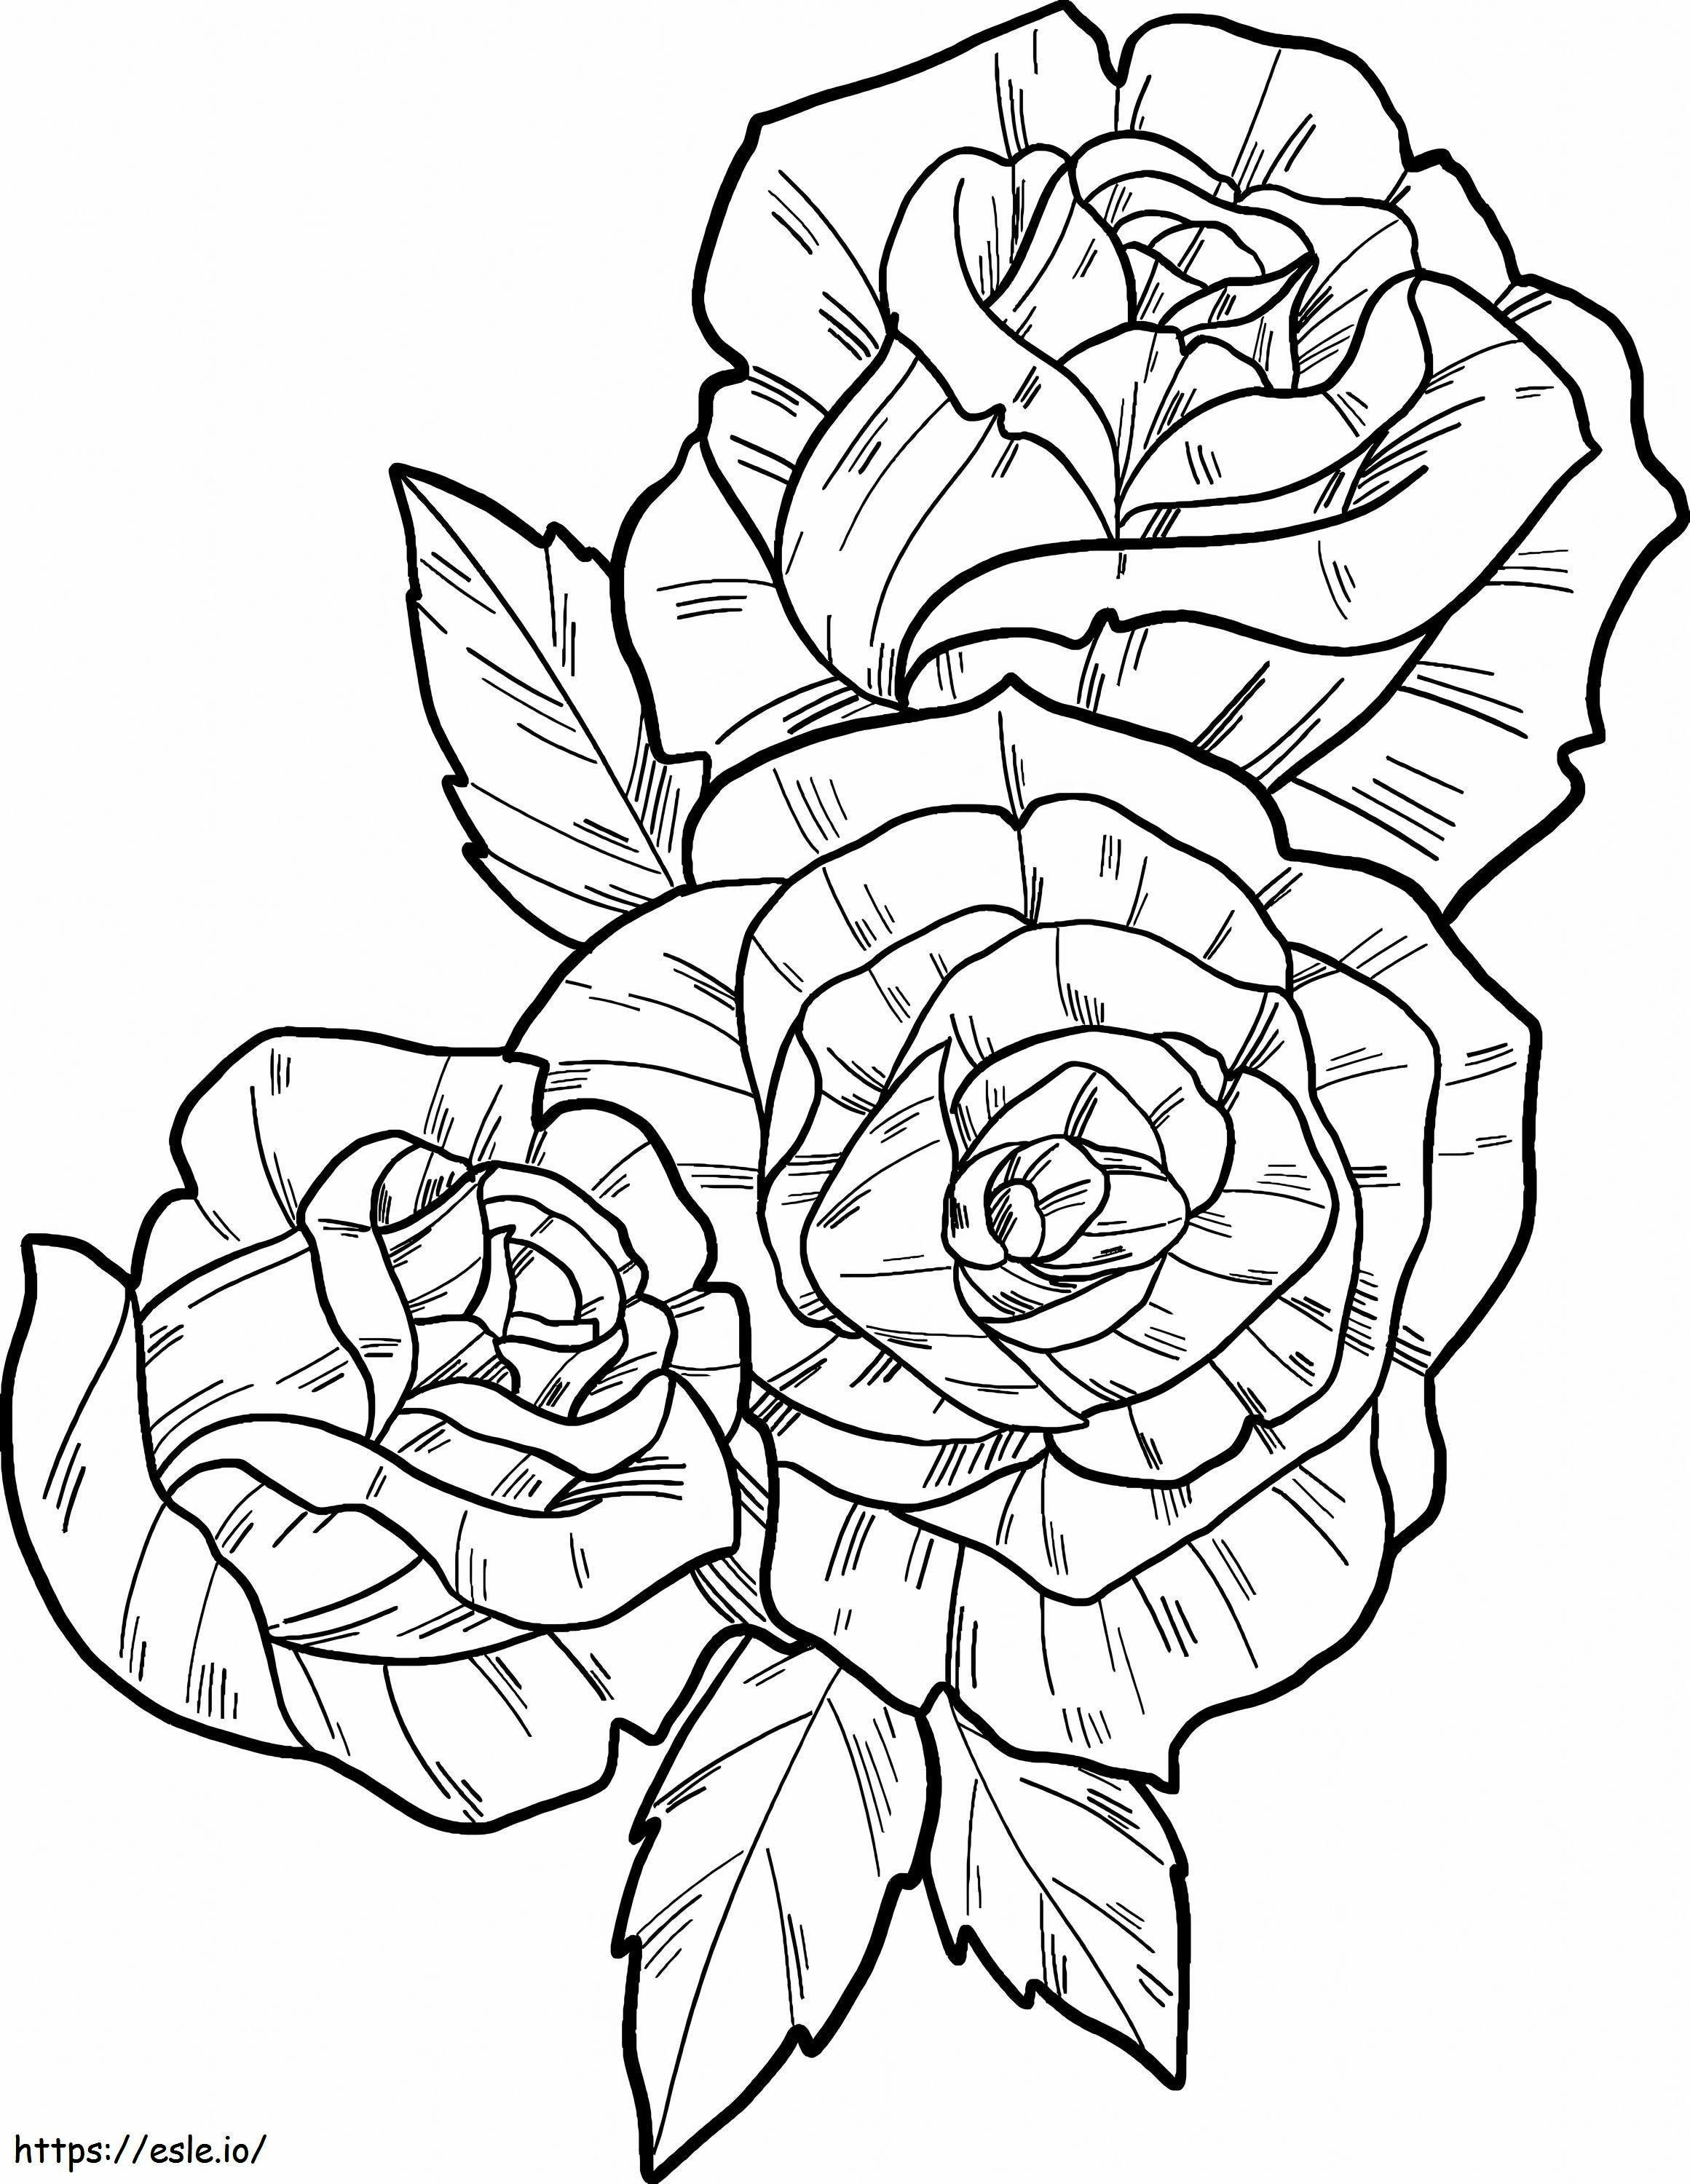 Three Beautiful Roses coloring page